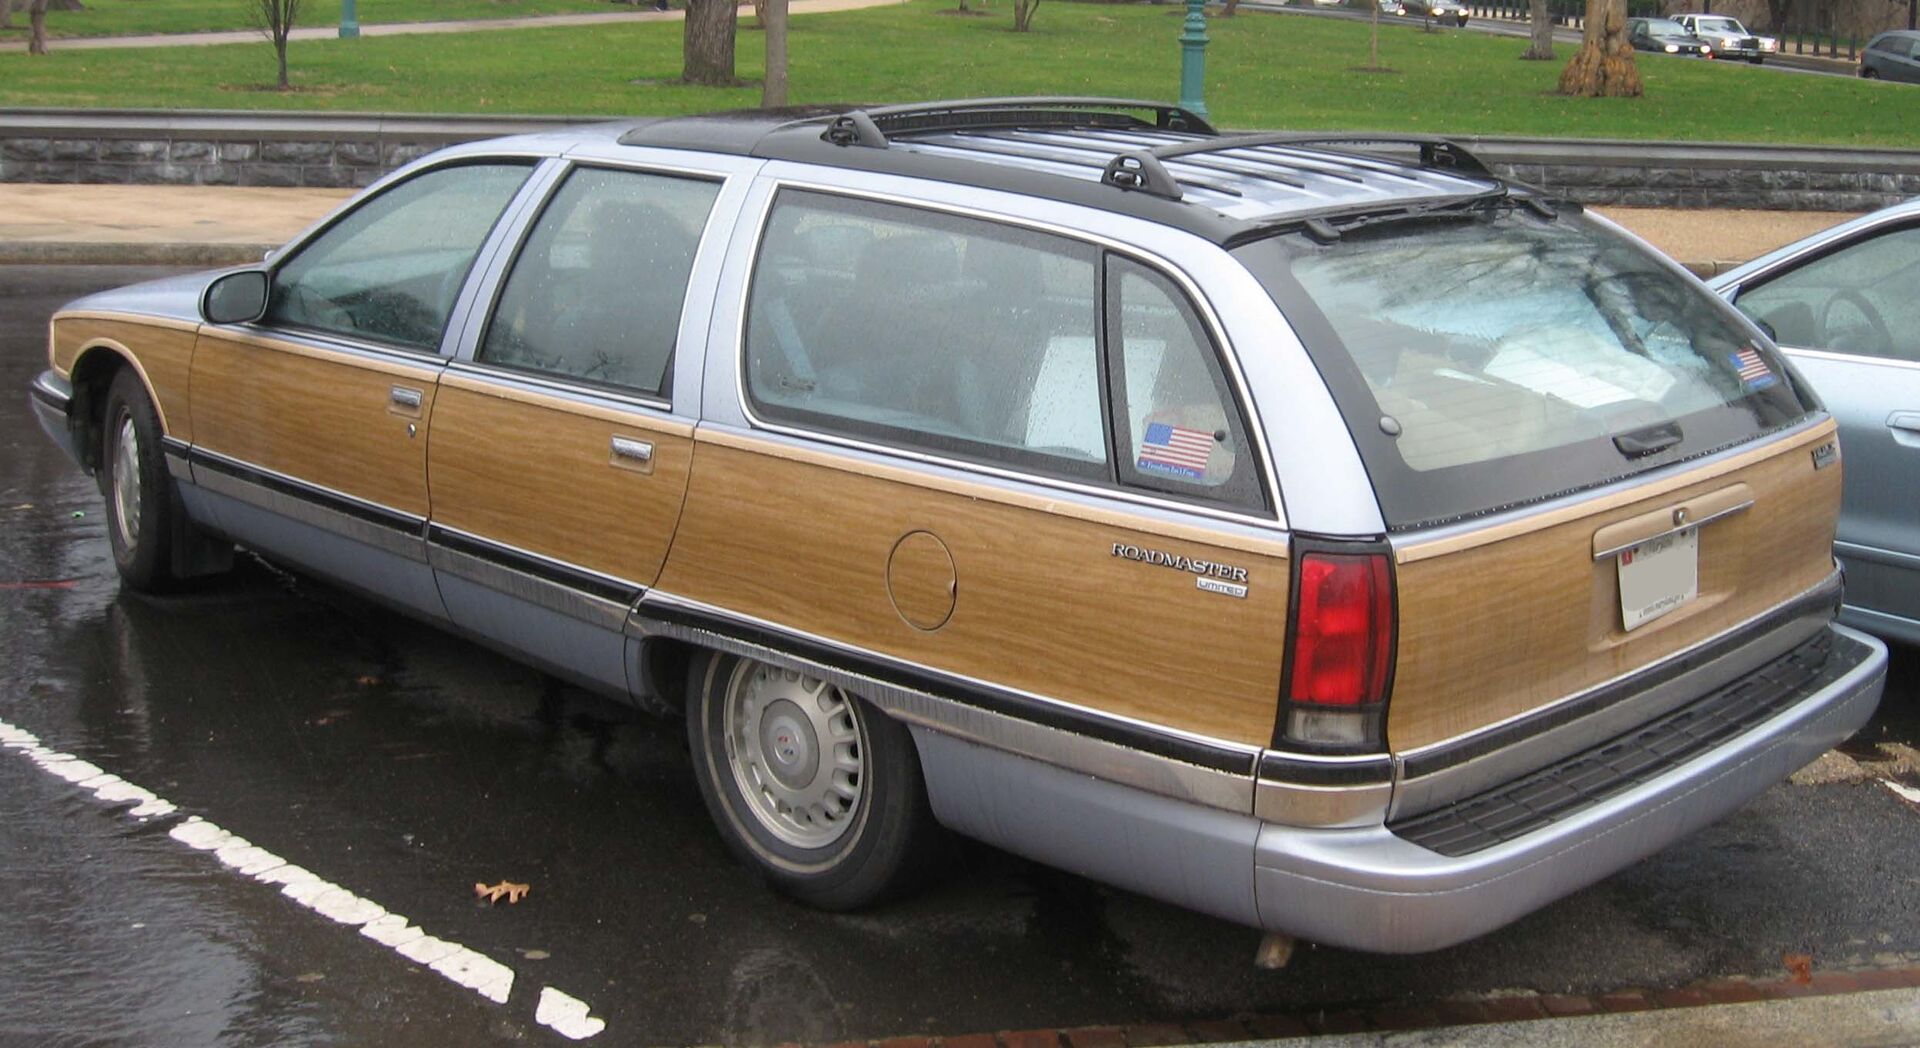 Buick Roadmaster Wagon 1991 - 1996 Specs and Technical Data, Fuel